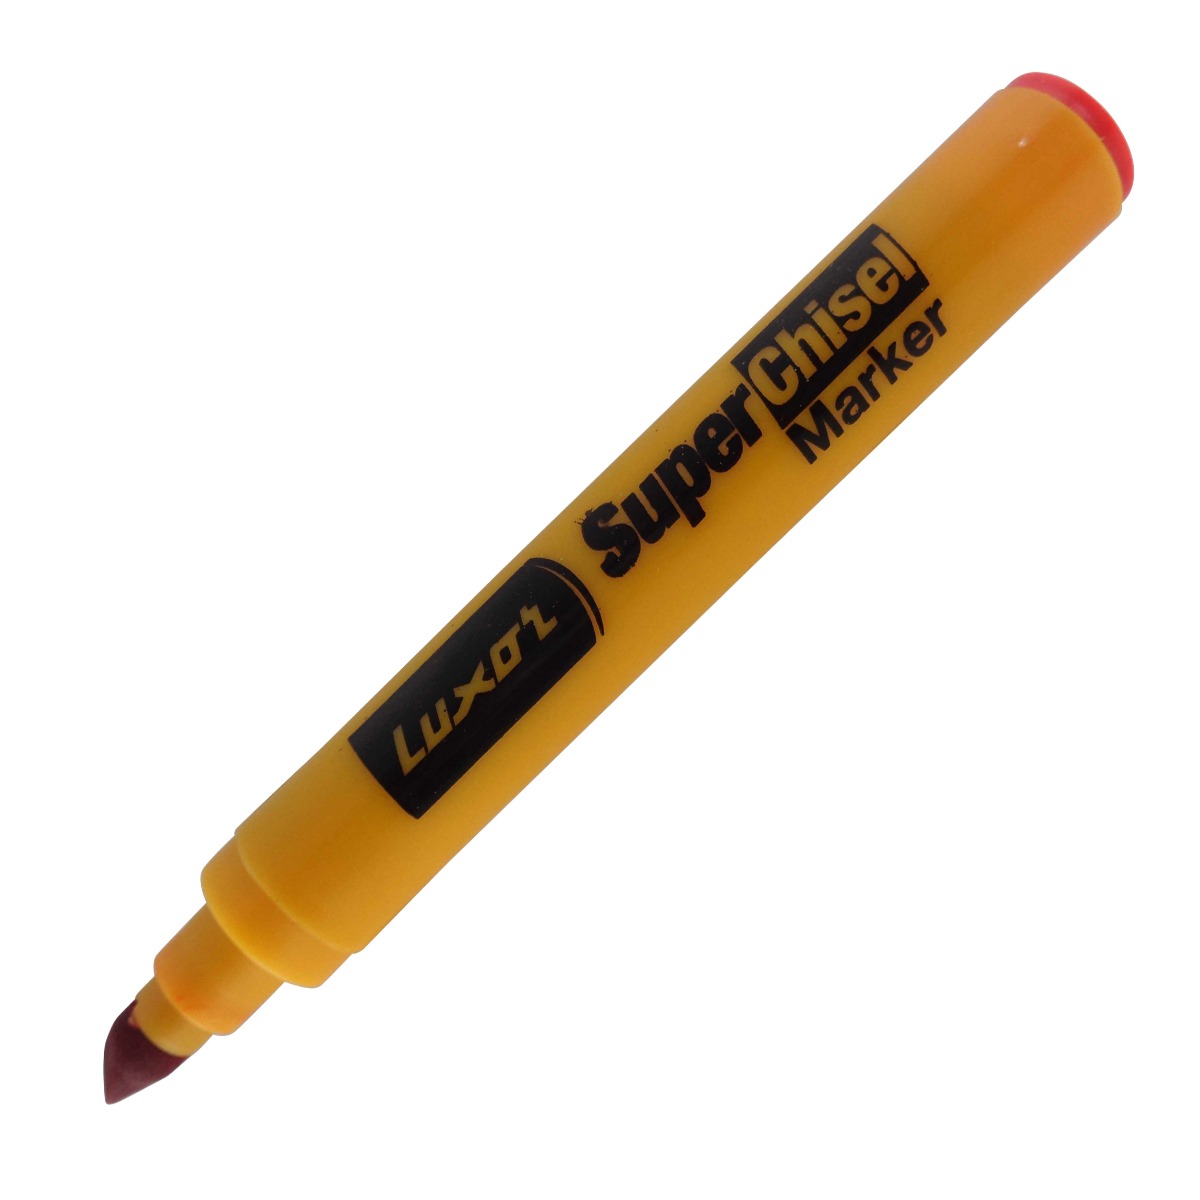 Luxor Model: 15097 Super chisel Yellow color body with Red color cap with red ink marker